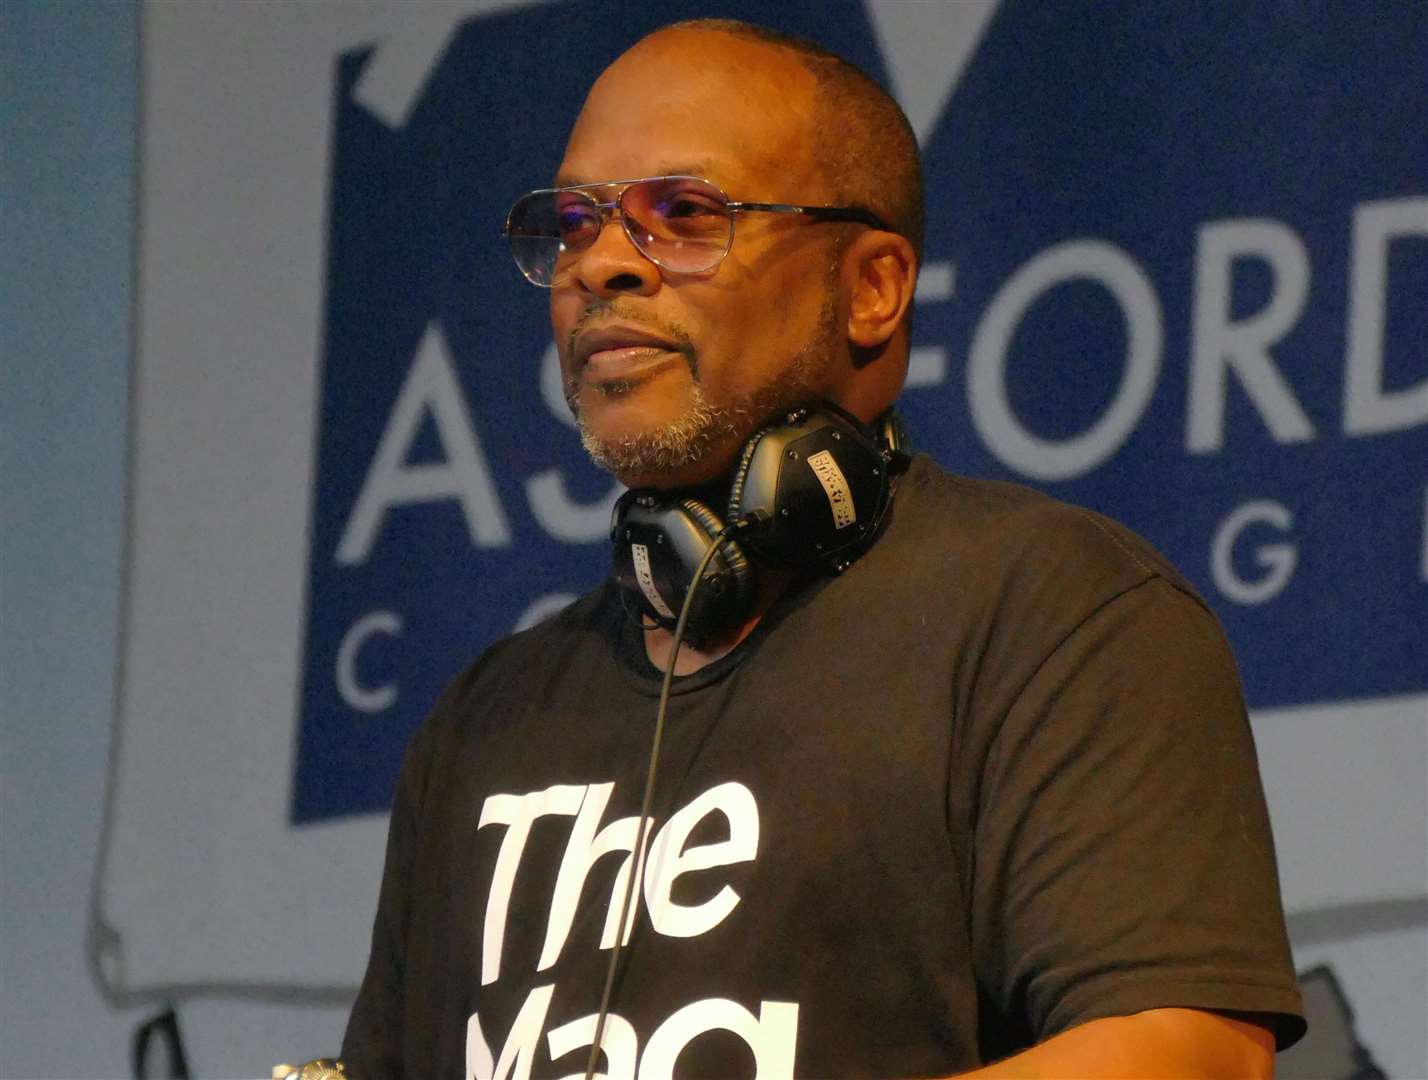 DJ Jazzy Jeff - star of 1990s sitcom The Fresh Prince of Bel Air - will be performing at Dreamland on May 4